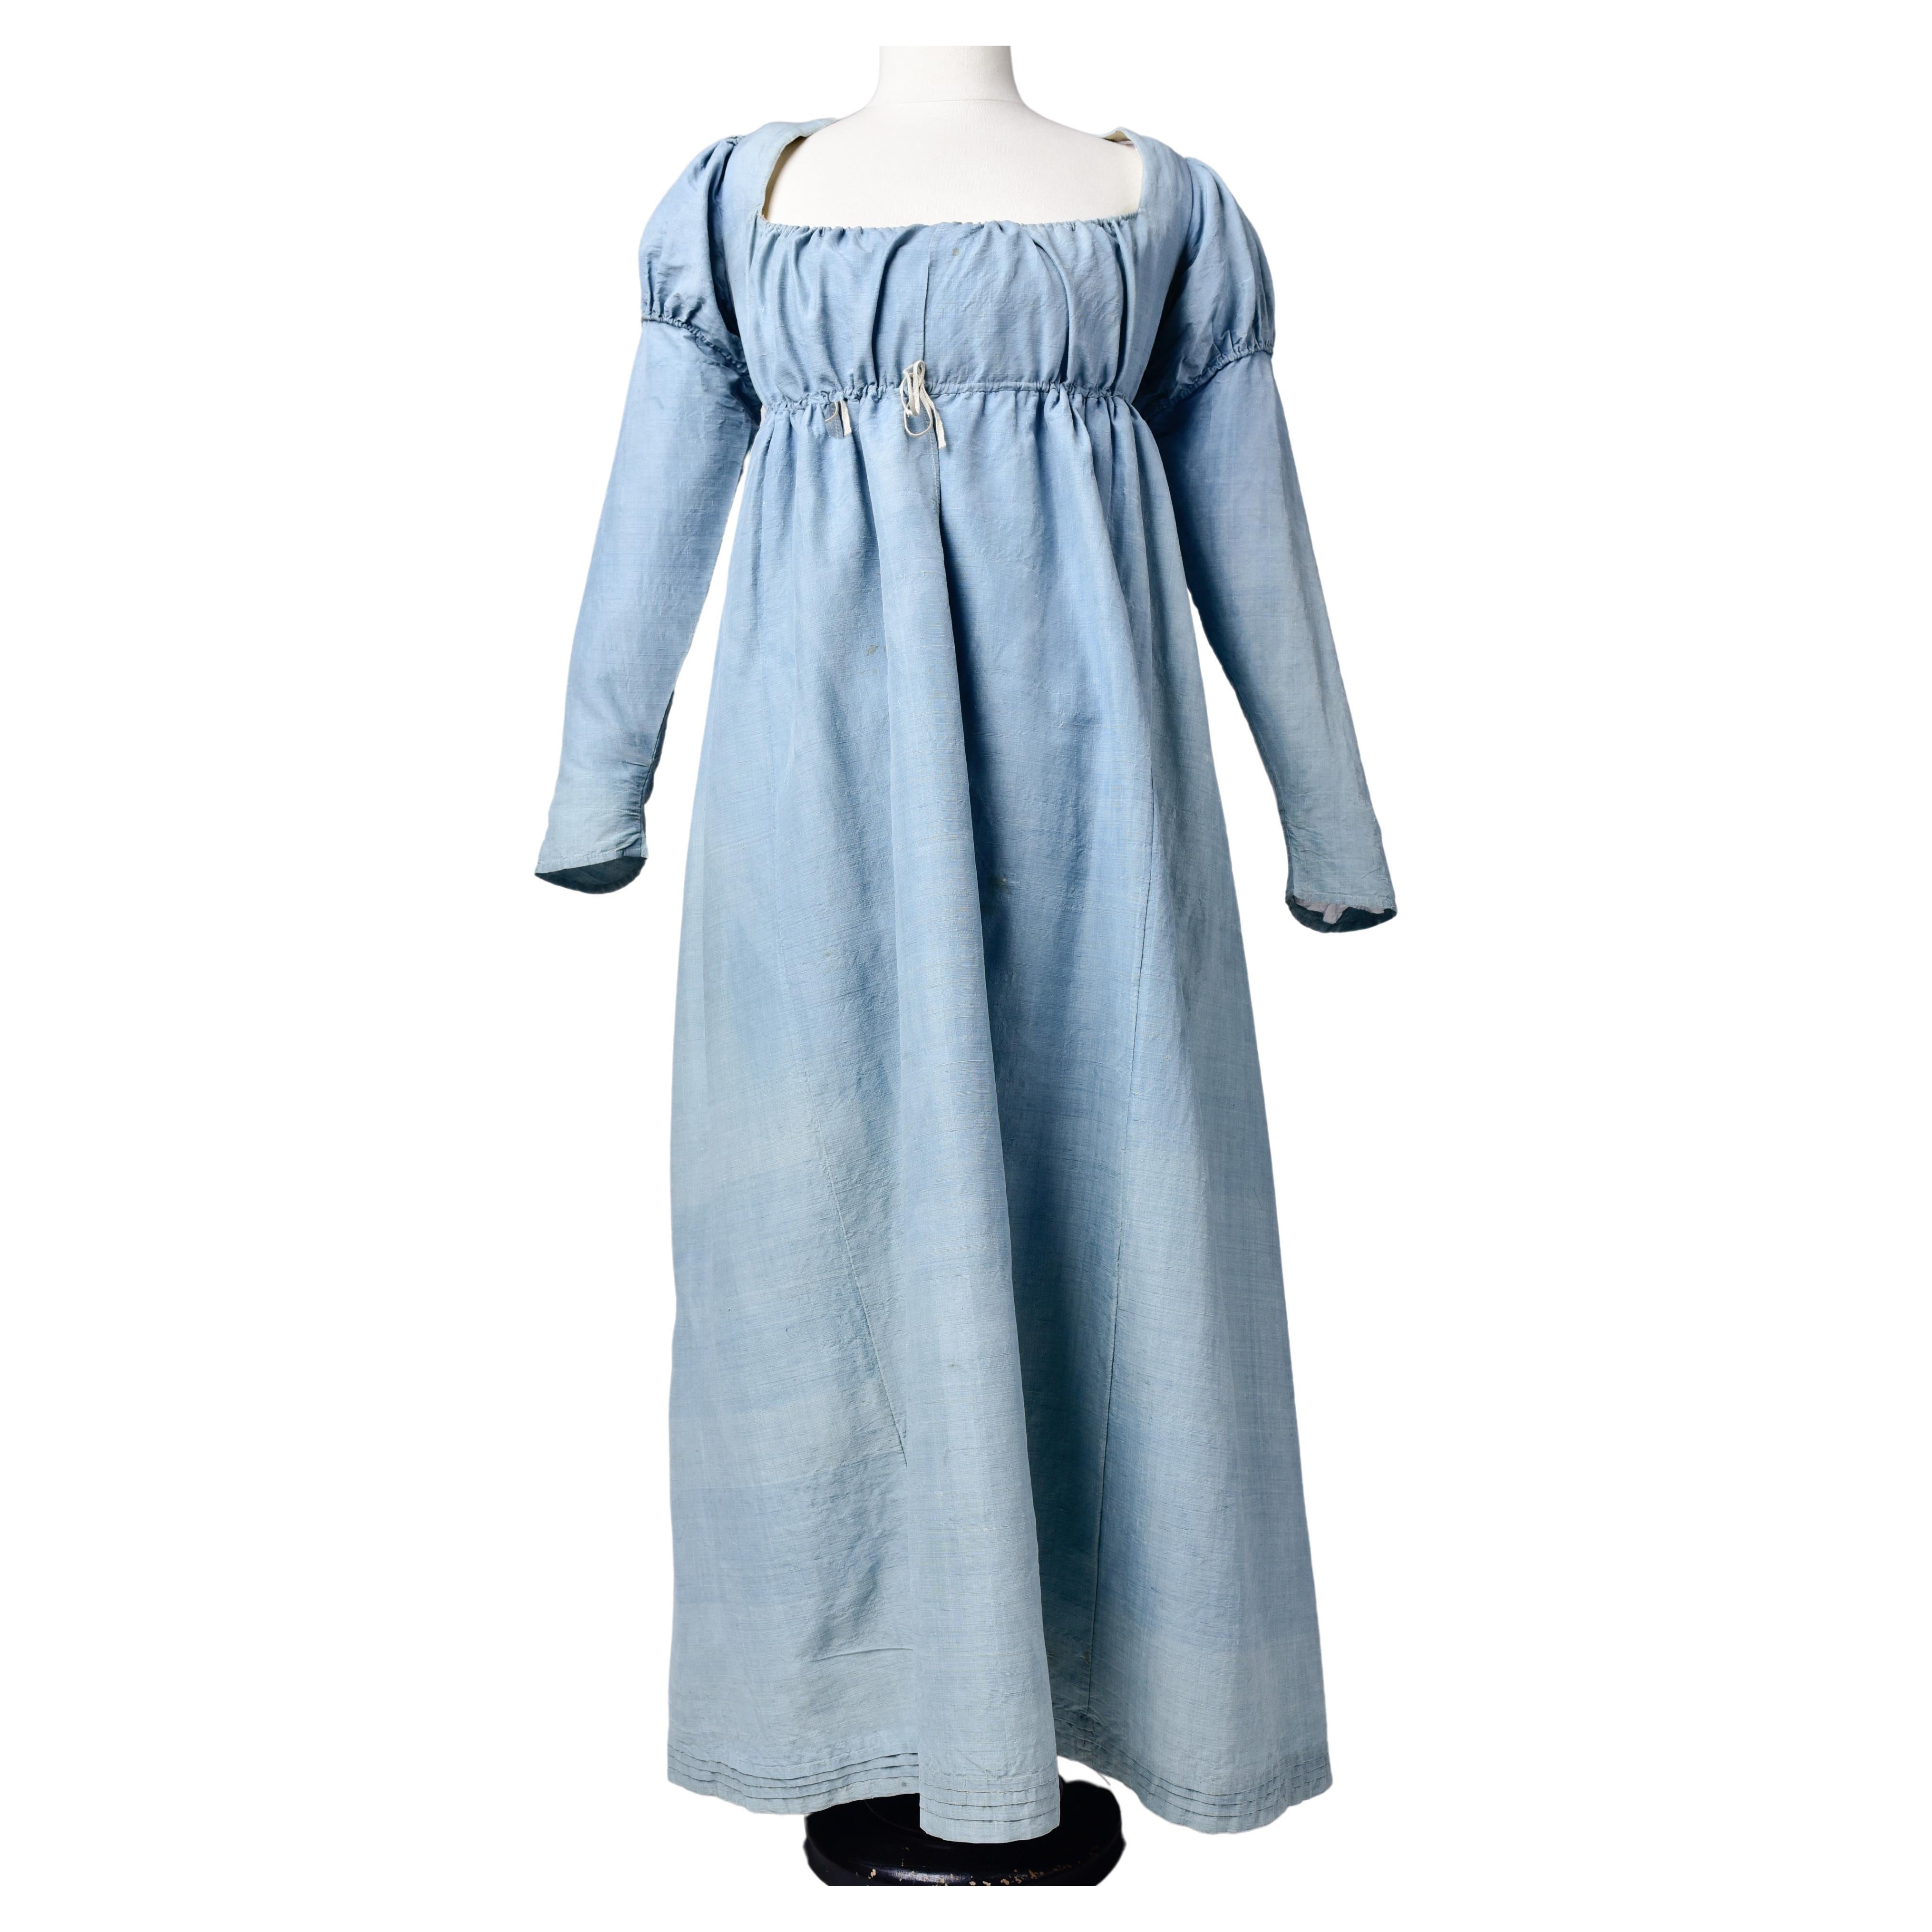 Circa 1800-1805
France

Rare pastel blue silk day dress for the petite bourgeoisie dating from the French Consulat or the beginning of the Premier Empire. Background in gros de Naples silk with wild silk effect and variations in colour of the indigo